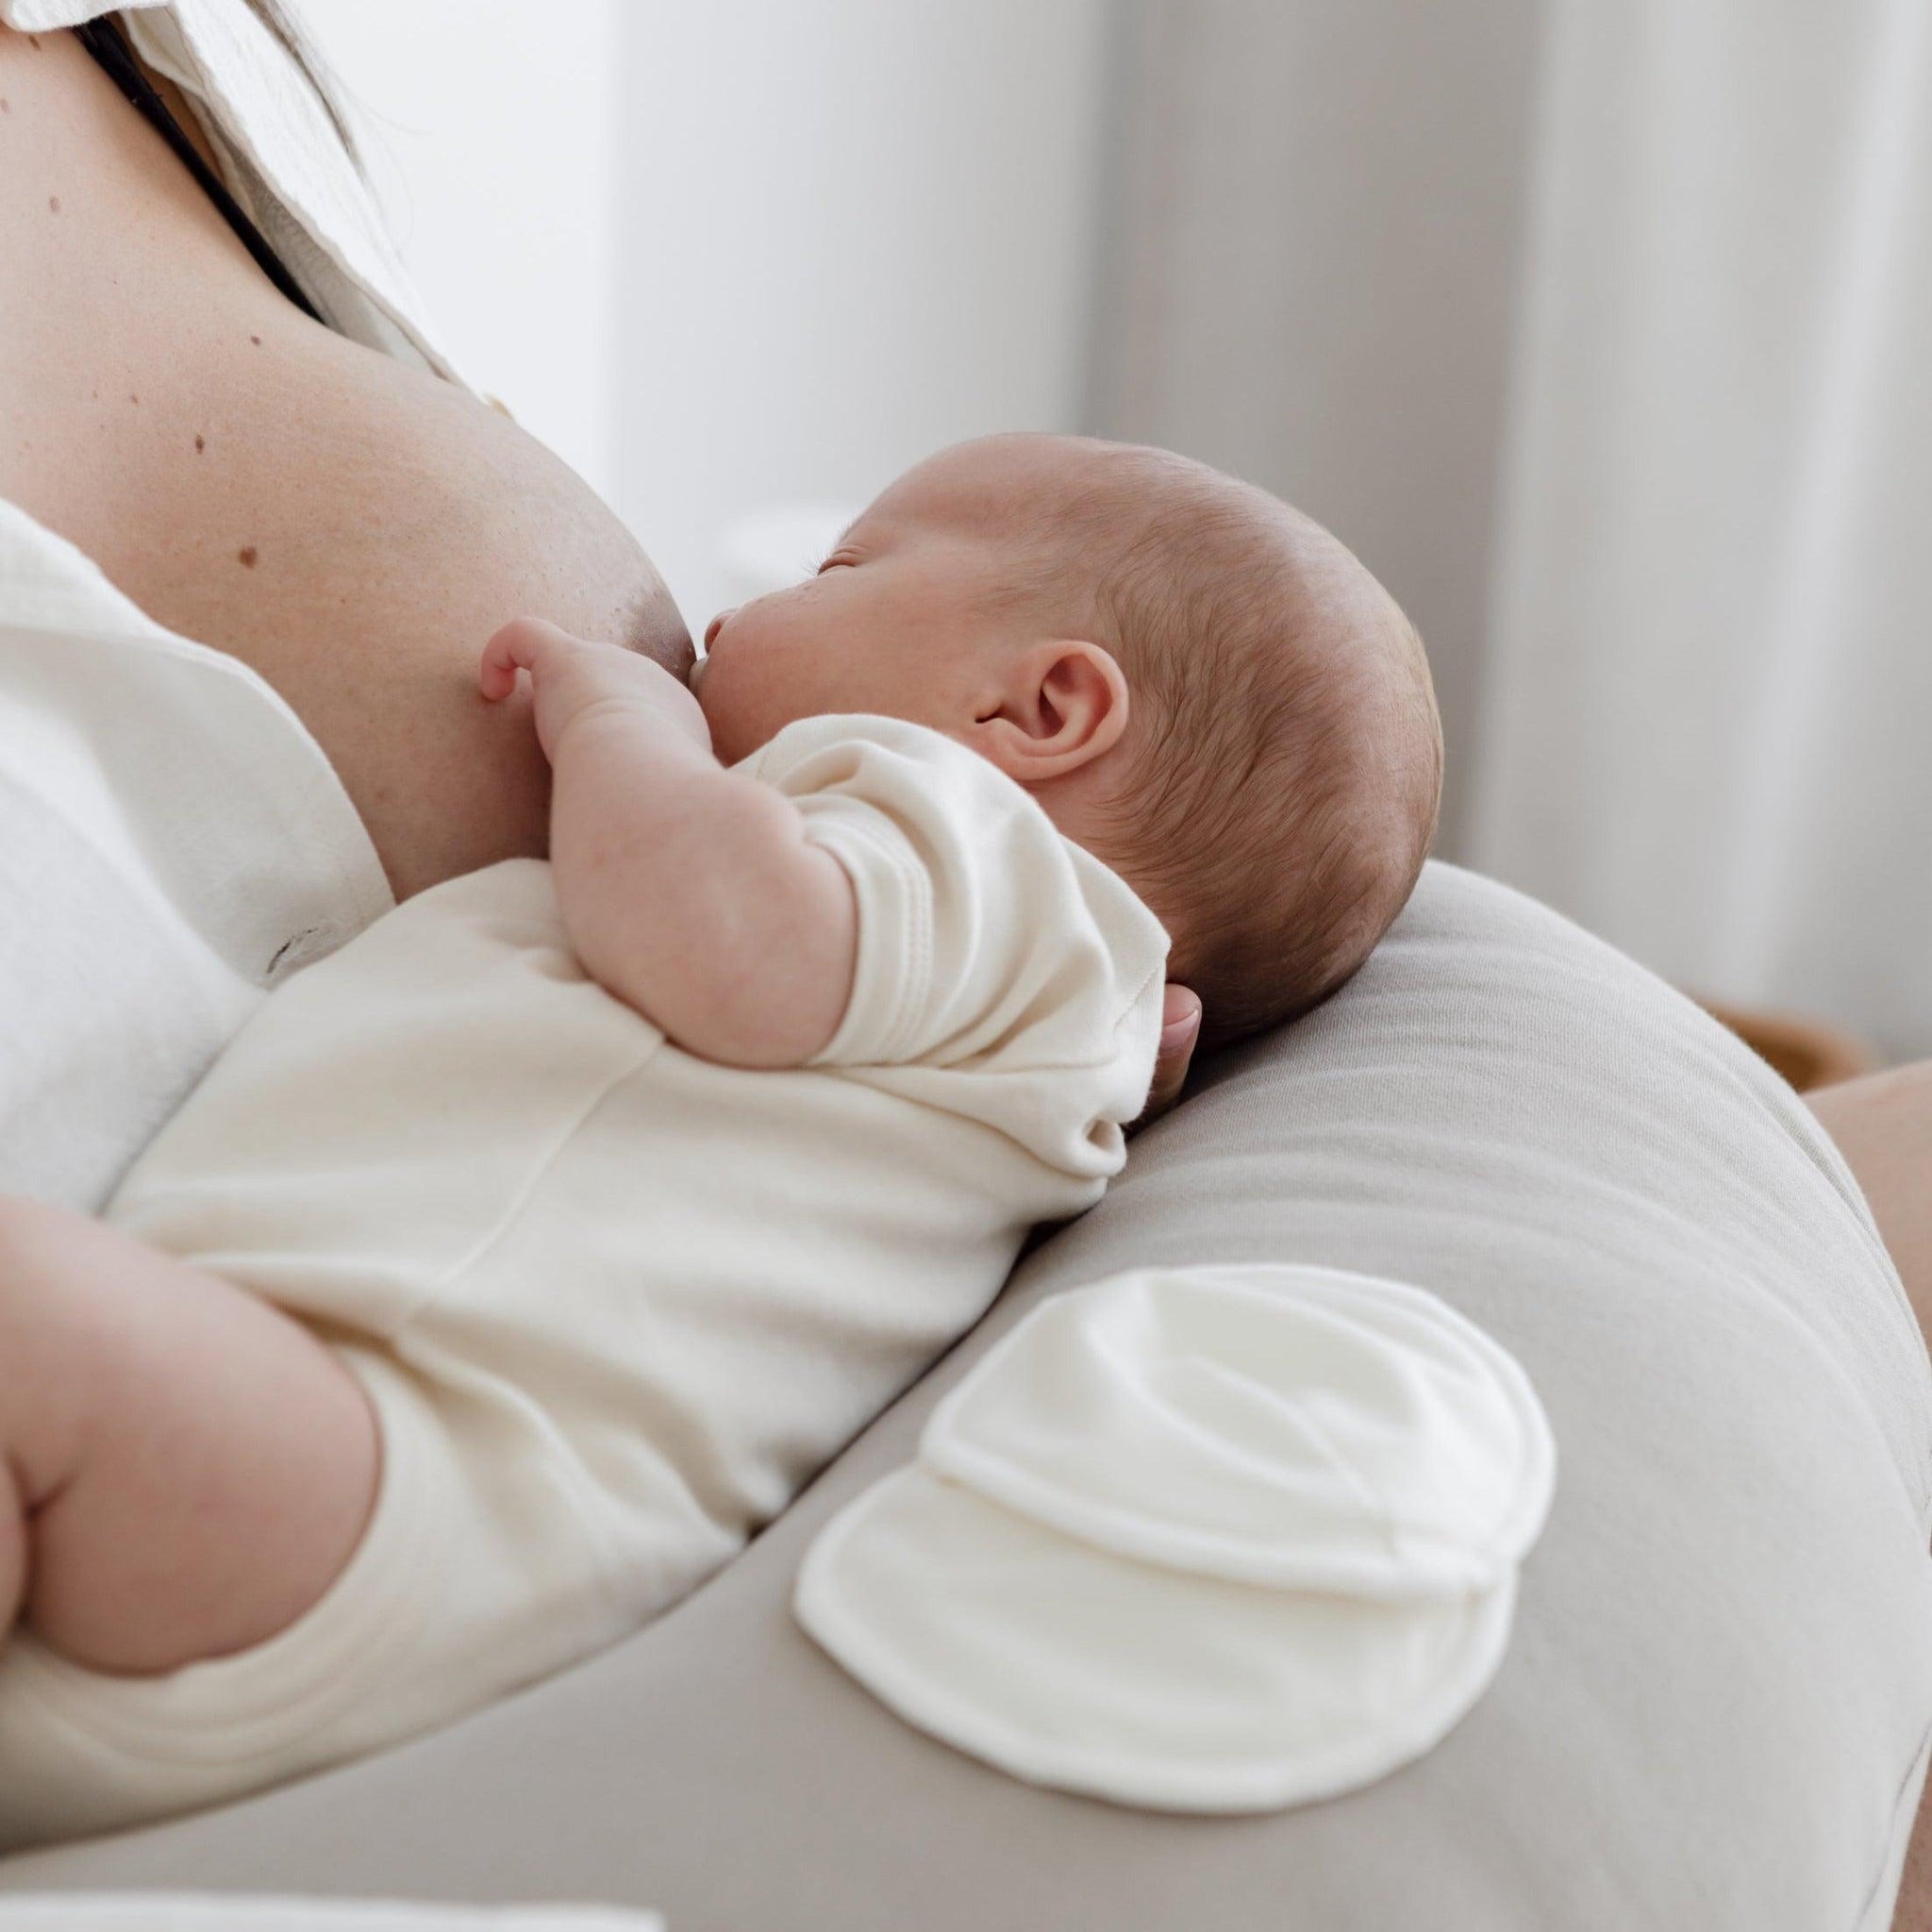 A woman is breastfeeding a baby in a white Mammae shirt, using bosom wearables for breast care during breastfeeding.